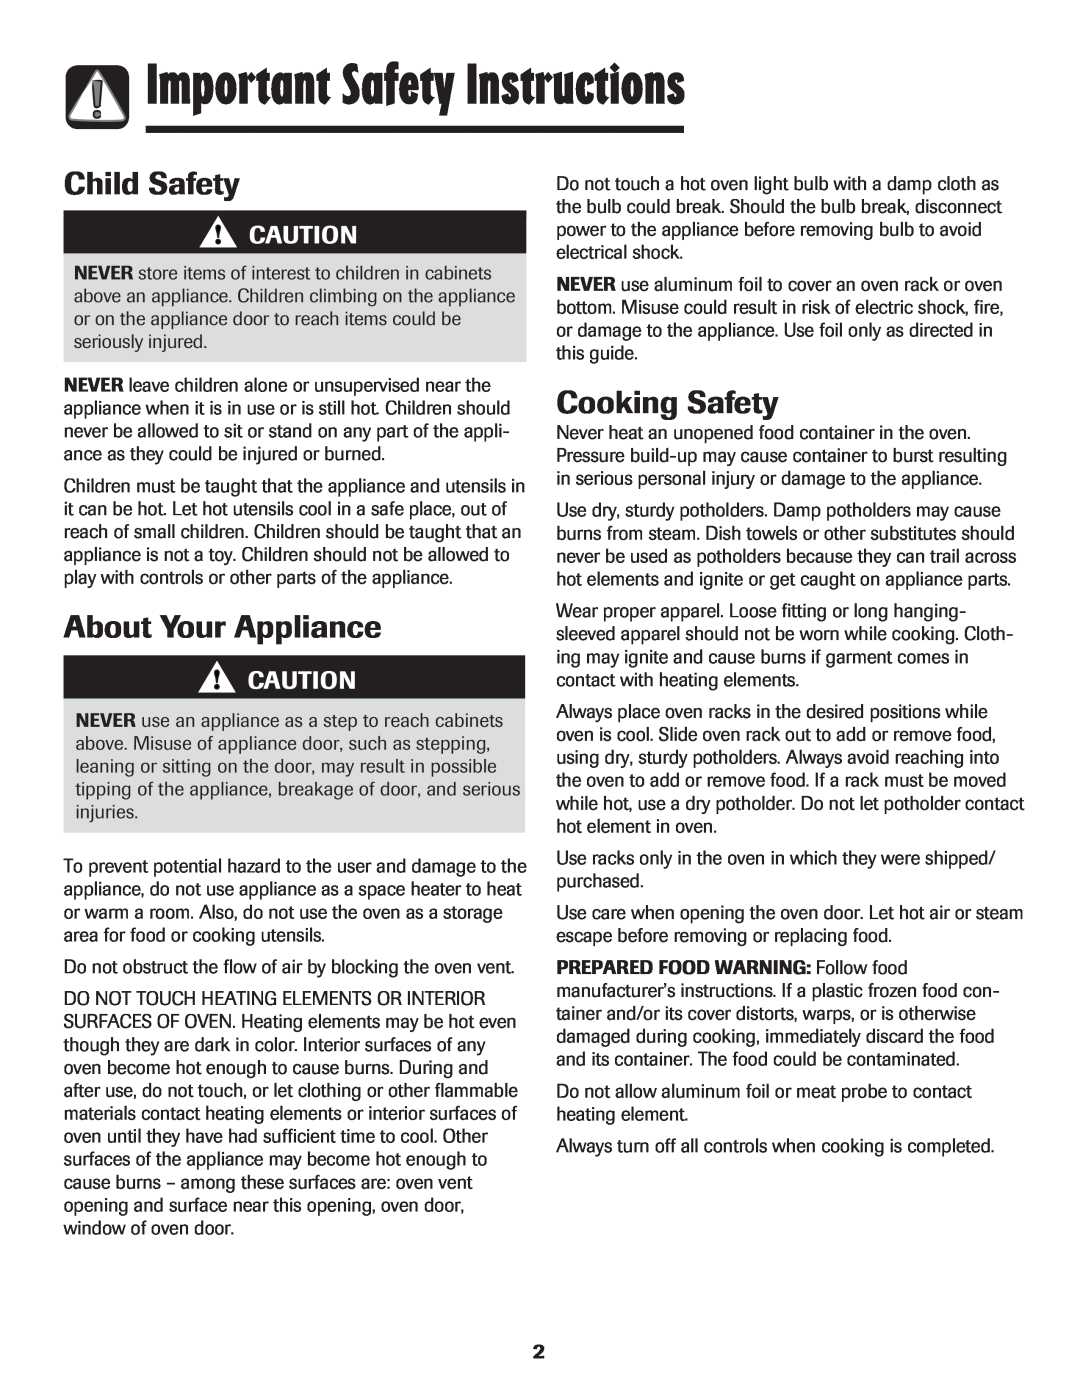 Amana 8113P454-60 warranty Important Safety Instructions, Child Safety, About Your Appliance, Cooking Safety 